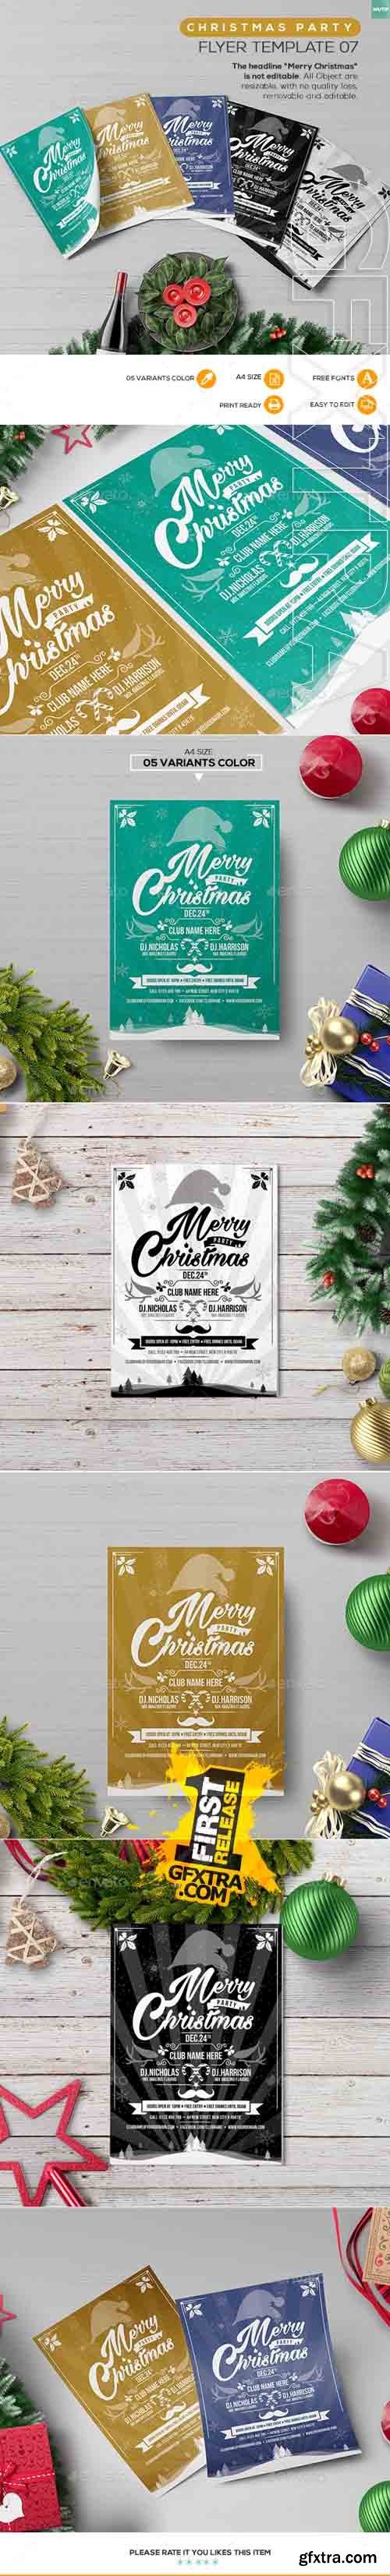 GR - Christmas Party - Flyer Template 07 13761640